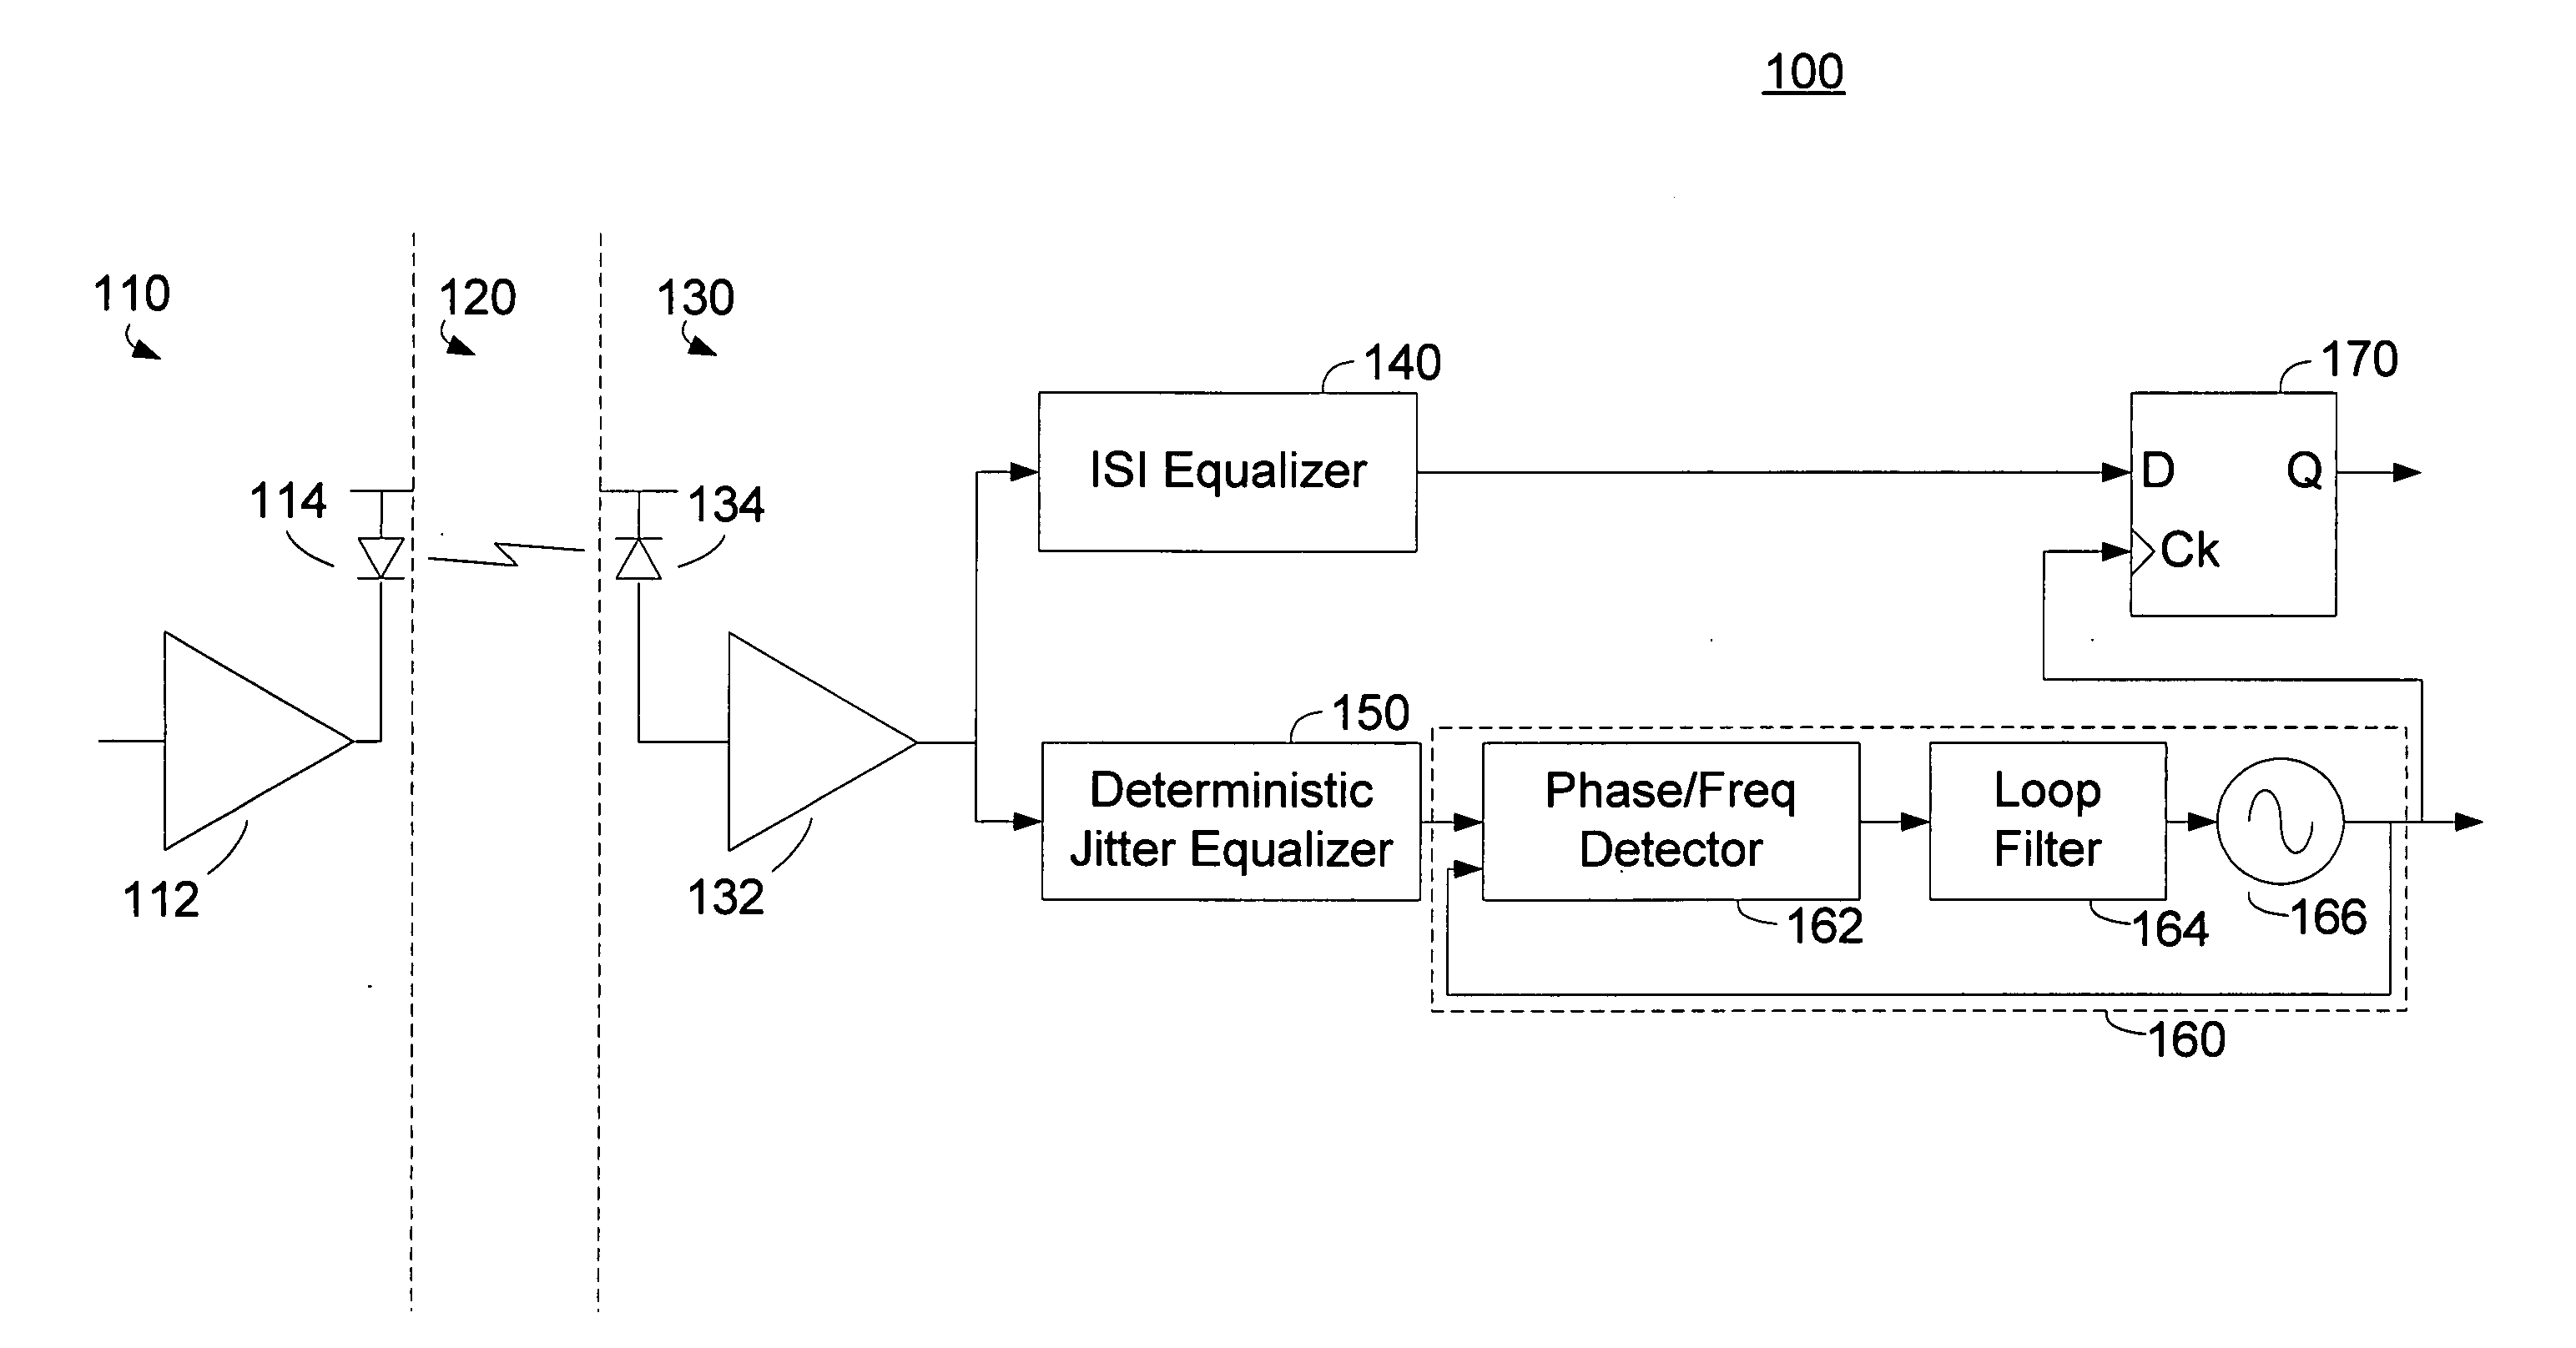 Deterministic jitter equalizer